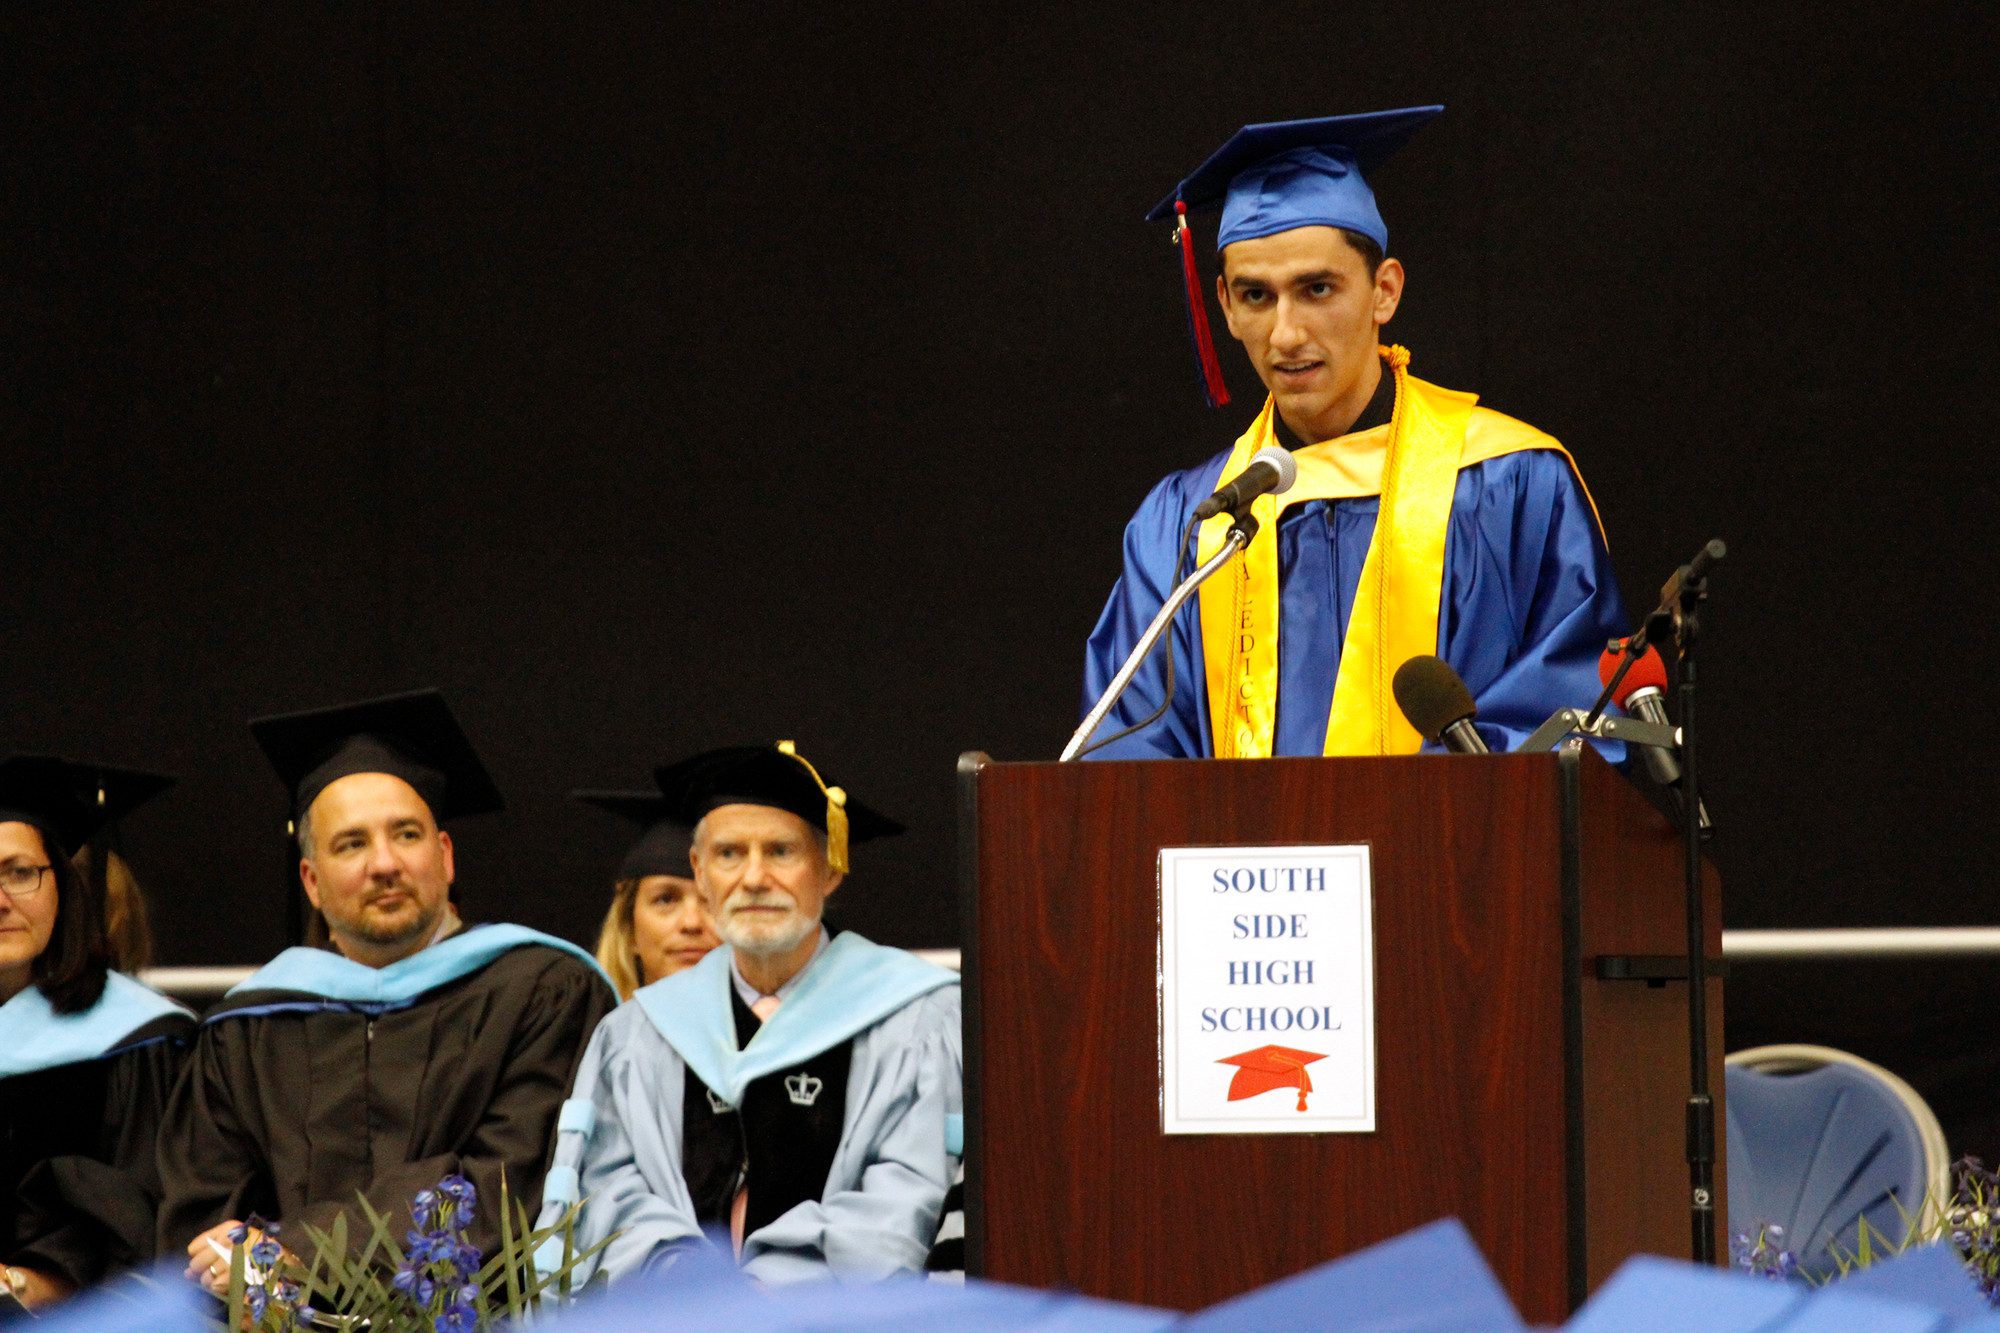 Valedictorian Alexander Boss noted some of the accomplishments that the class of 2015 had achieved in its four years at South Side.